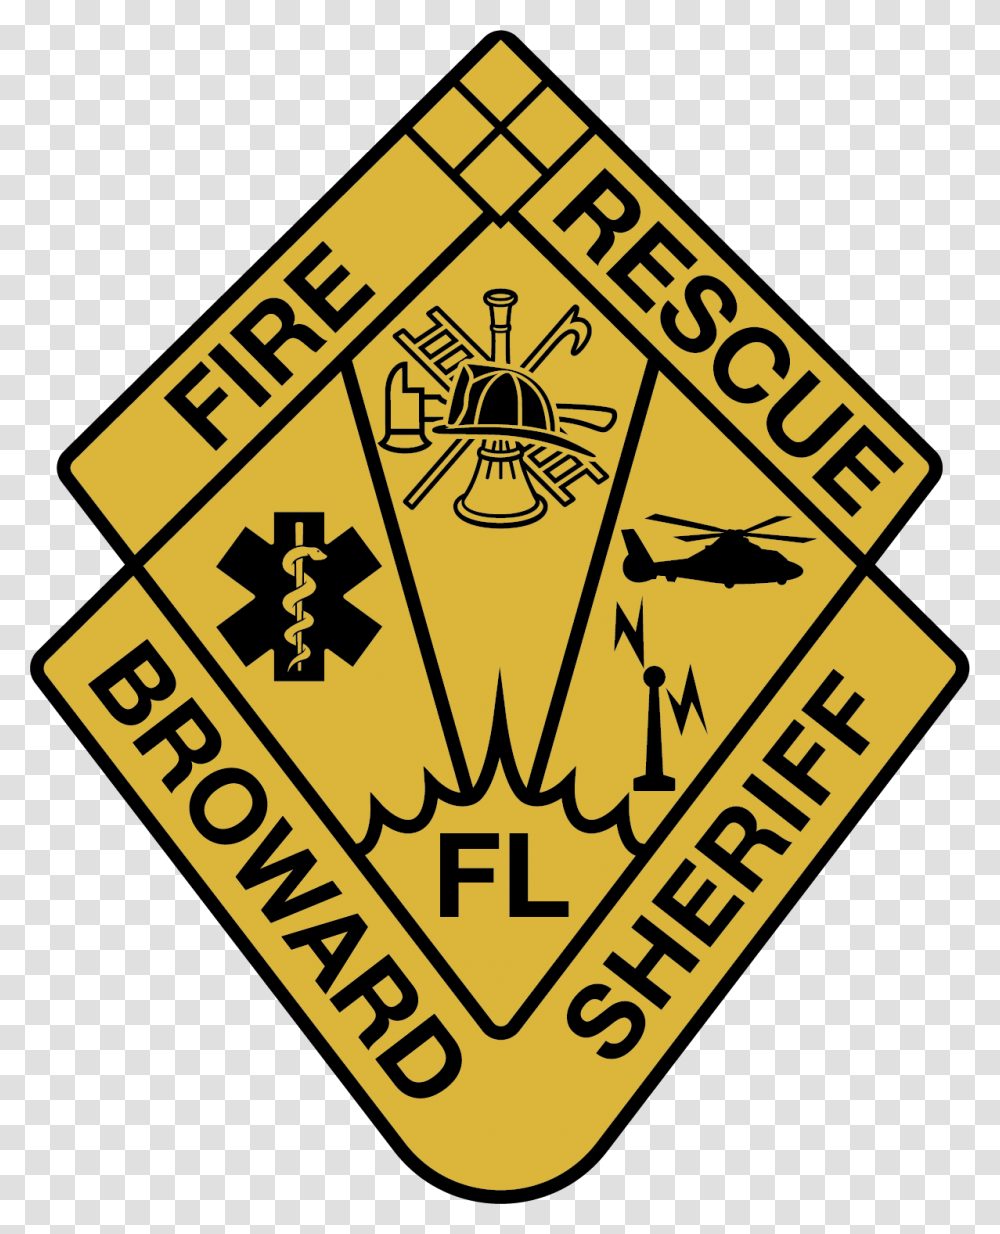 Bso Fr Logo Bso Fire Rescue, Trademark, Sign, Dynamite Transparent Png